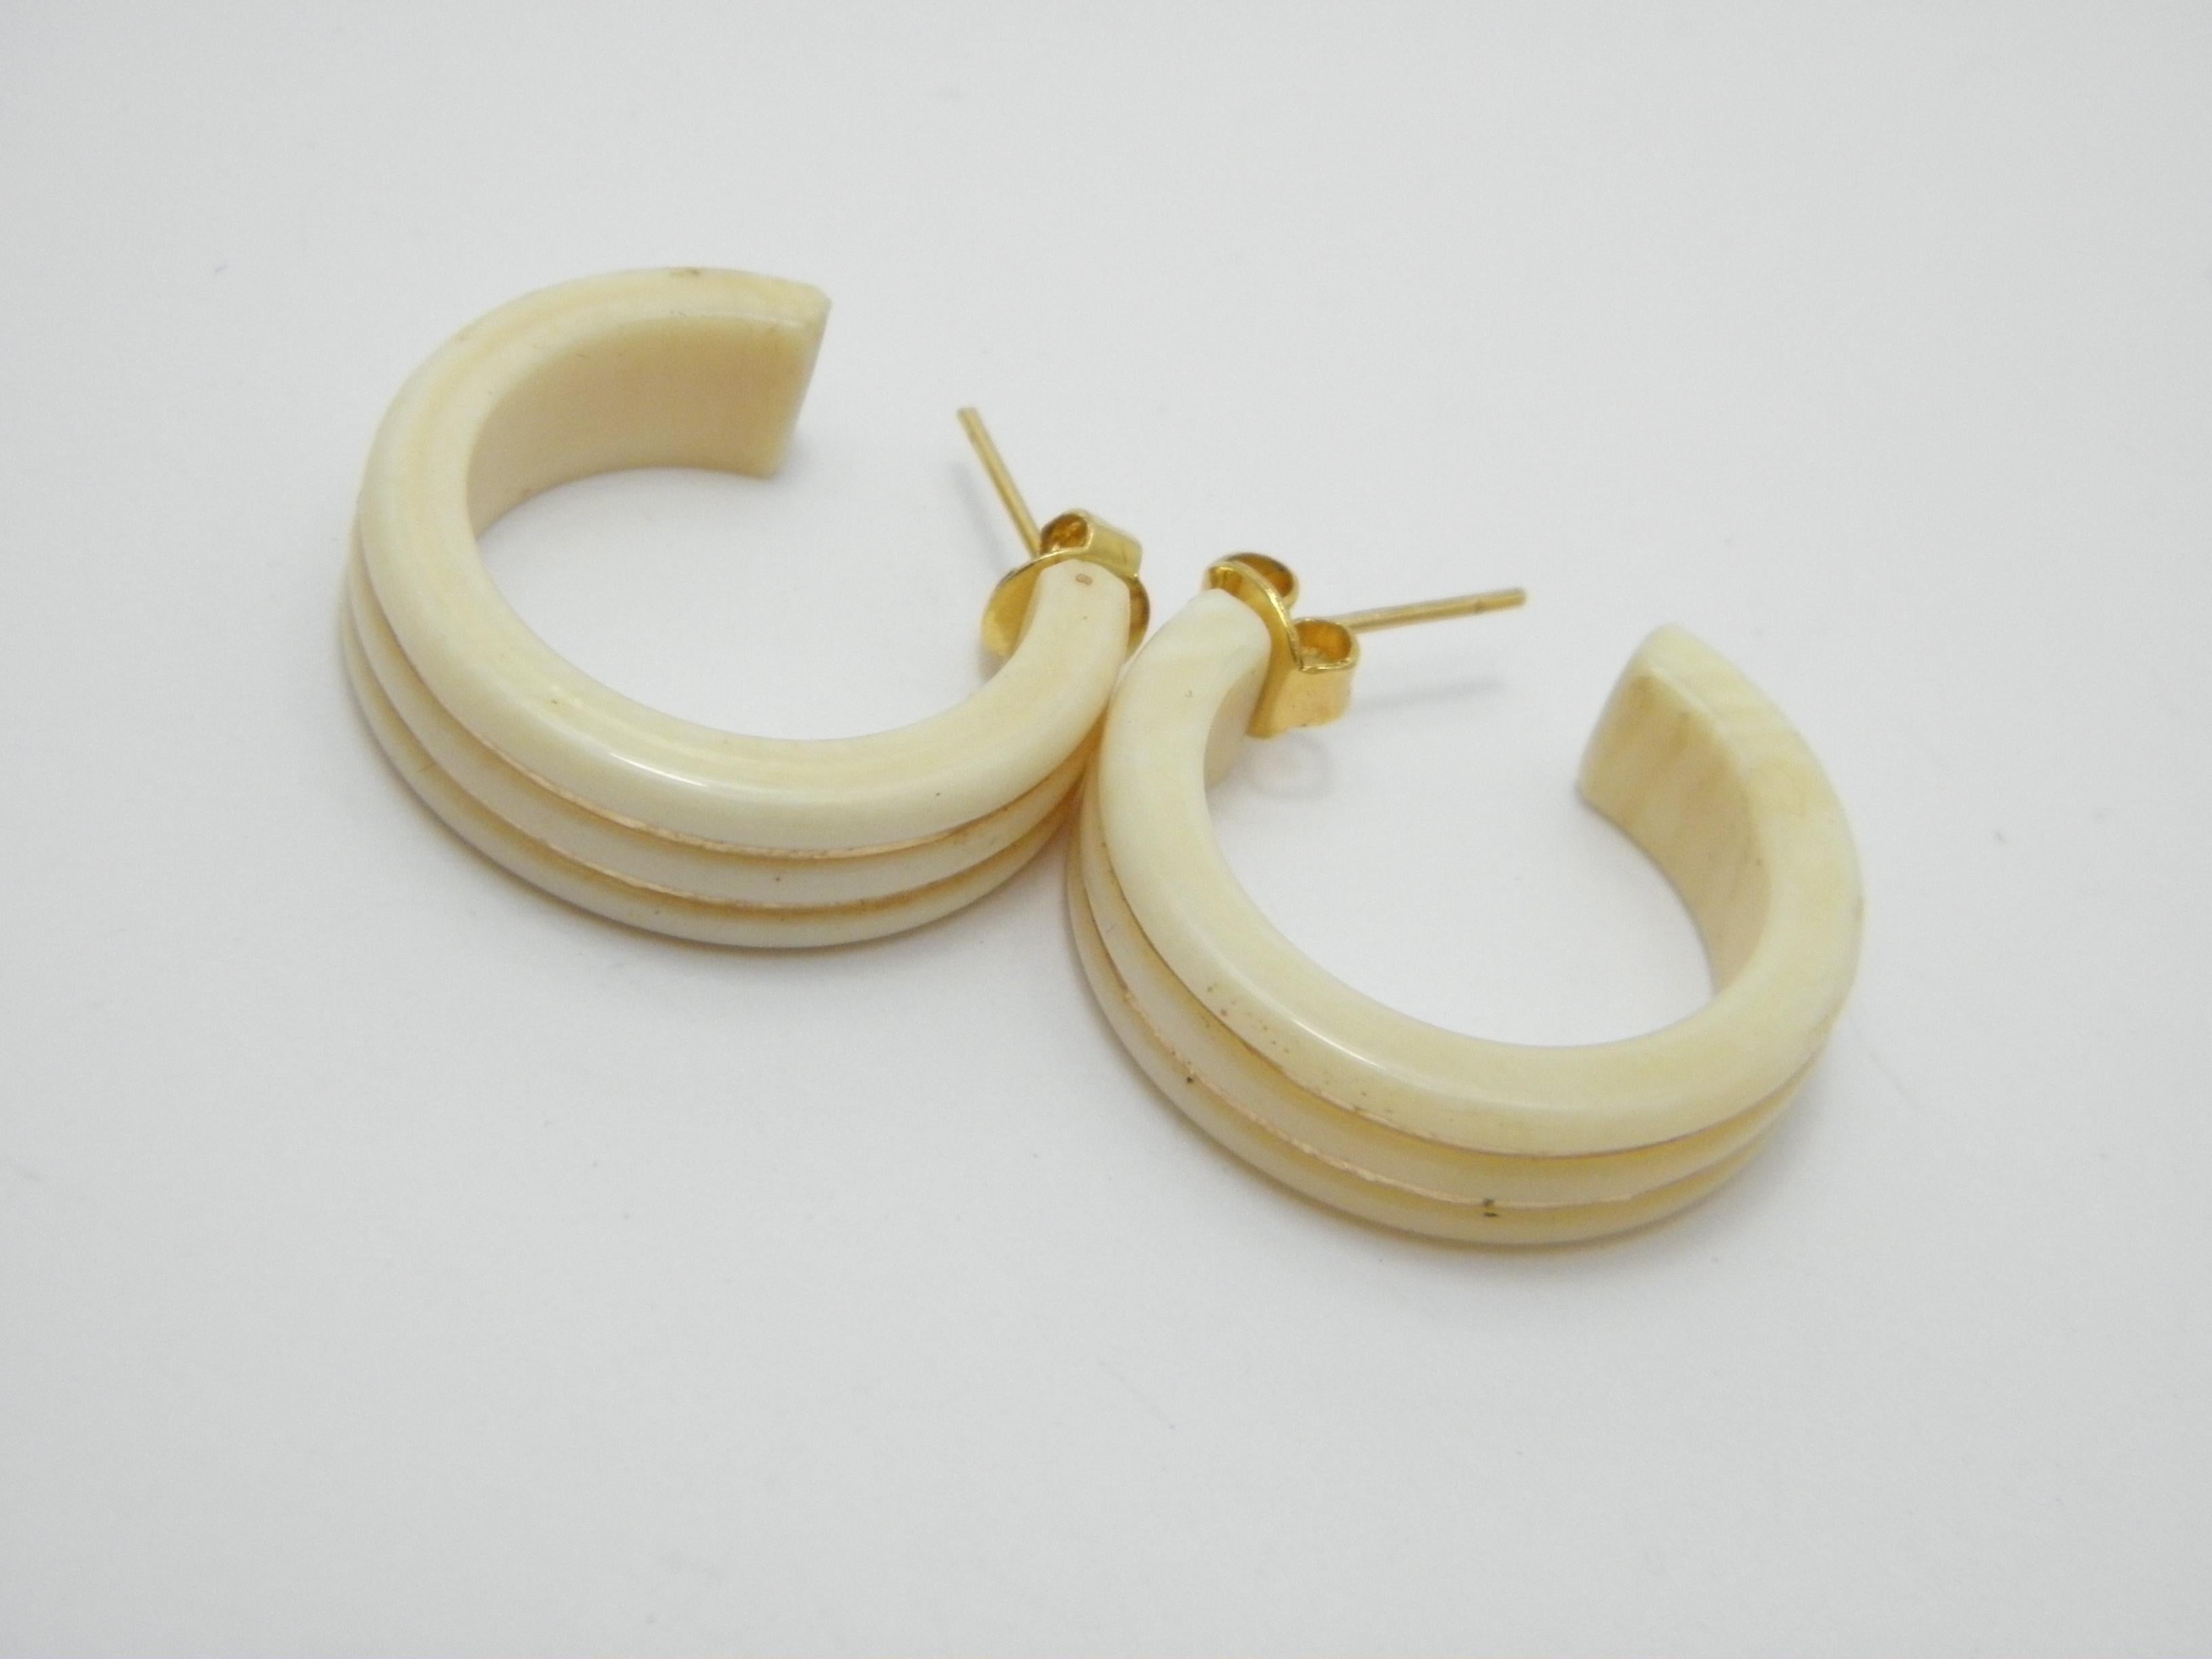 A very special item for you to consider:

14CT GOLD OX BONE MOURNING HOOP / STUD EARRINGS

DETAILS
Material: 14ct 585/000 Yellow Gold and Ox Bone
Style: Victorian style mourning earrings, hoops with push through stud.
Age: Vintage mid 1900s